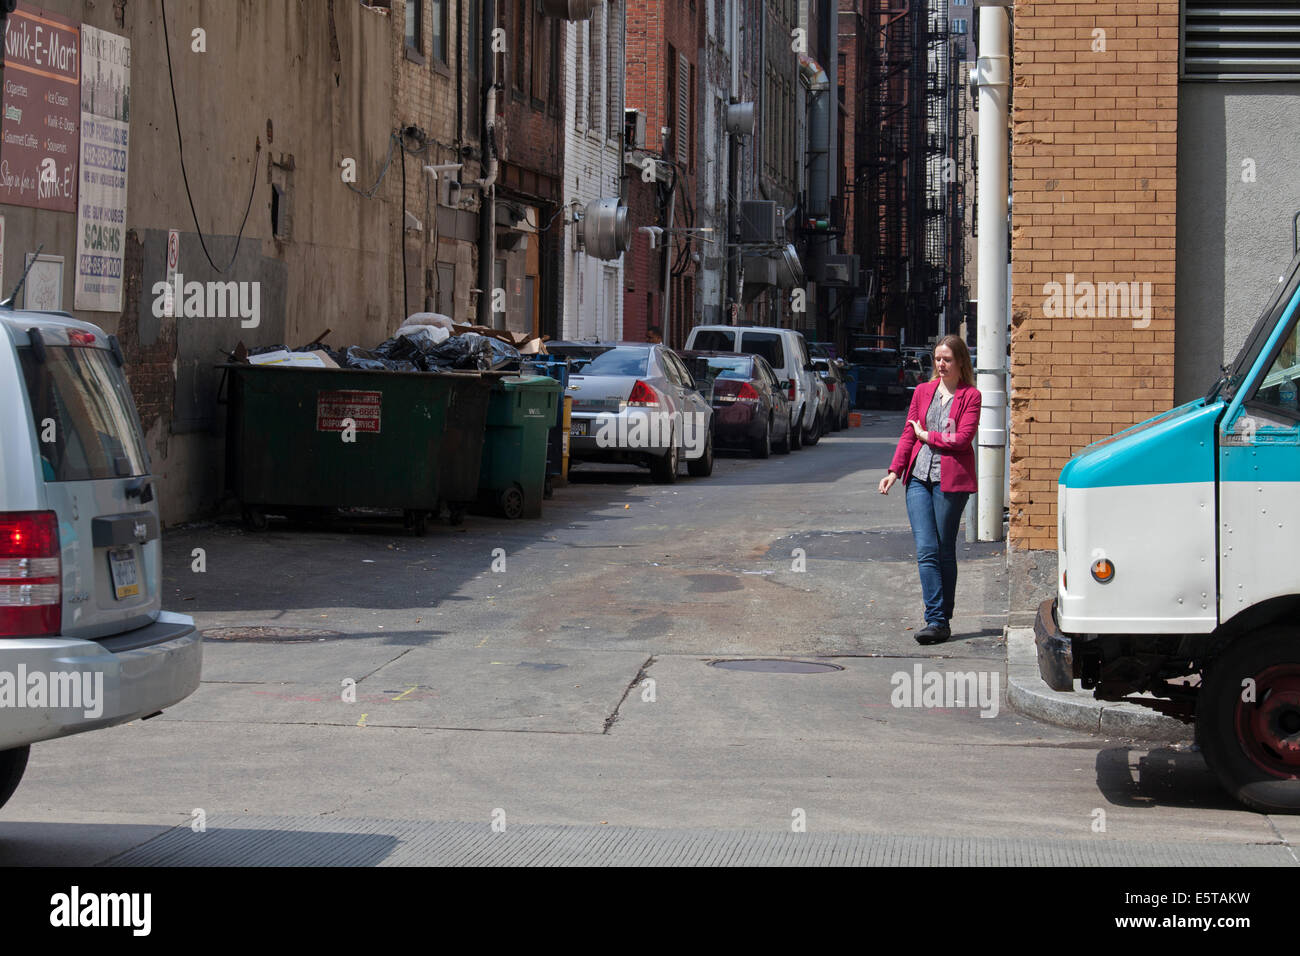 Pittsburgh, Pennsylvania - A woman stands in an alley, smoking a cigarette. Stock Photo